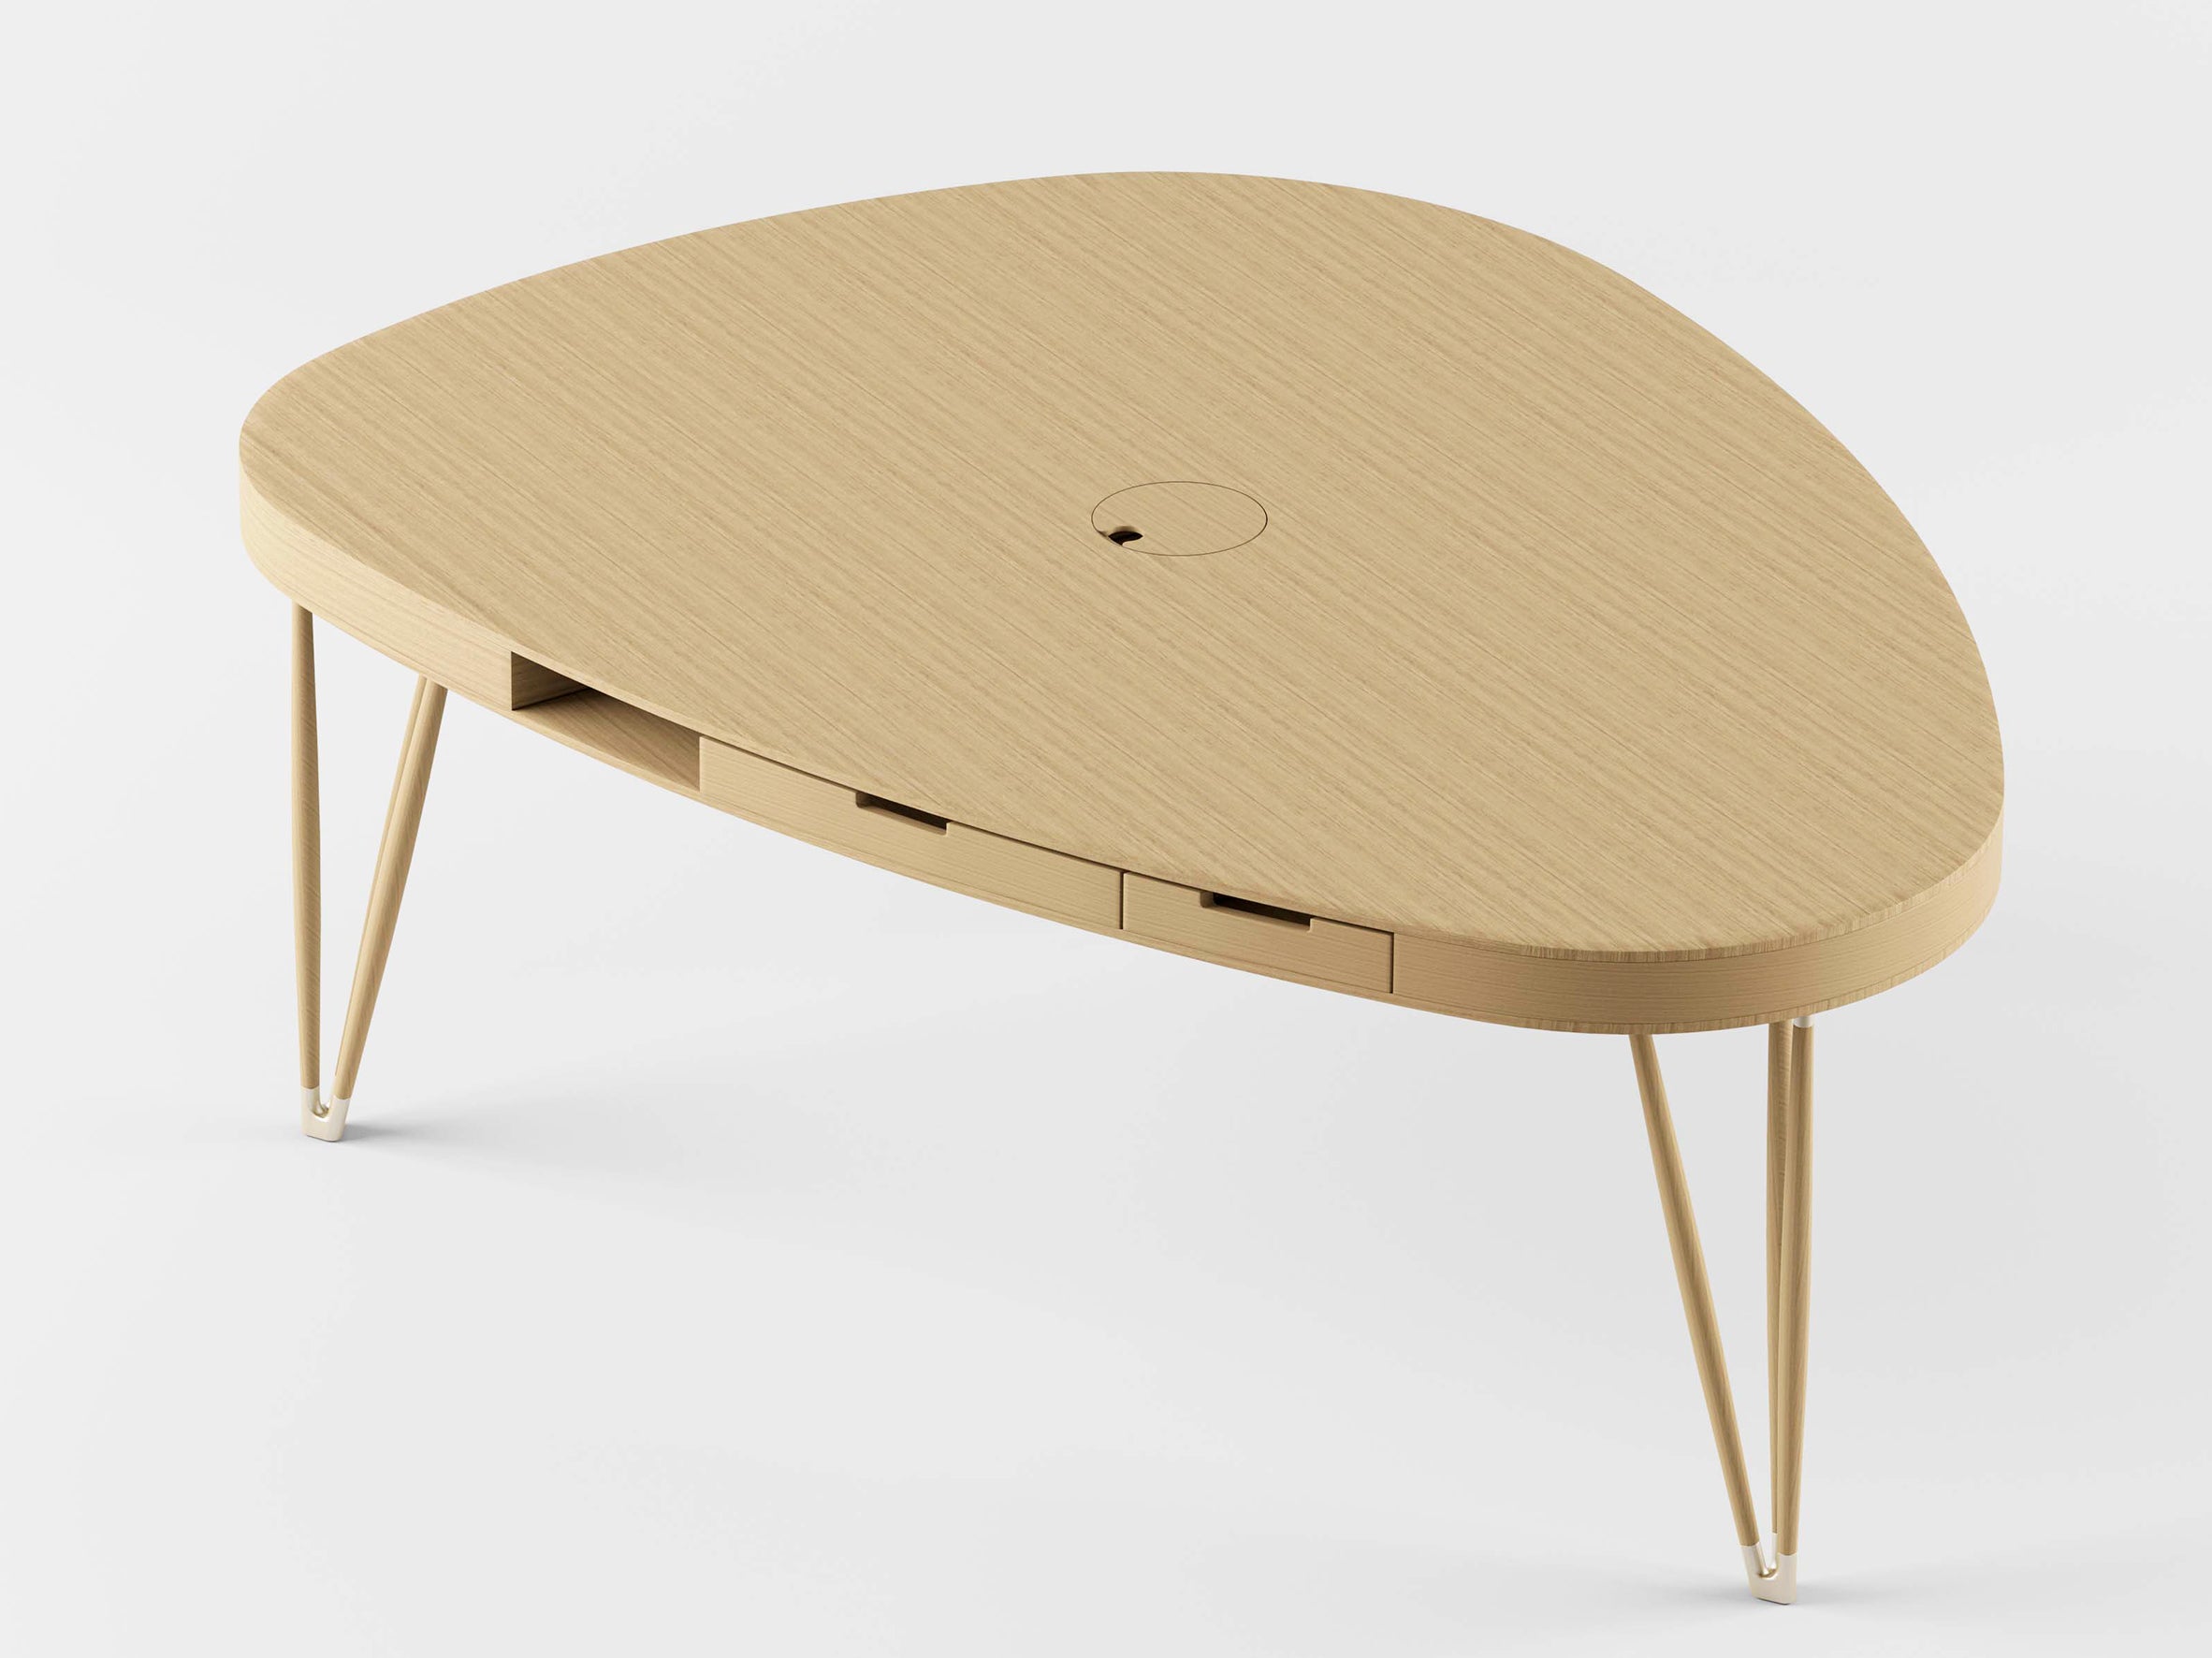 In its continuous research for innovation, Alias presents plettro, a reinterpretation of the tradi- tional table with drawers and designed by Paolo Rizzatto. From a typological point of view this solution creates a storage space in the table top,